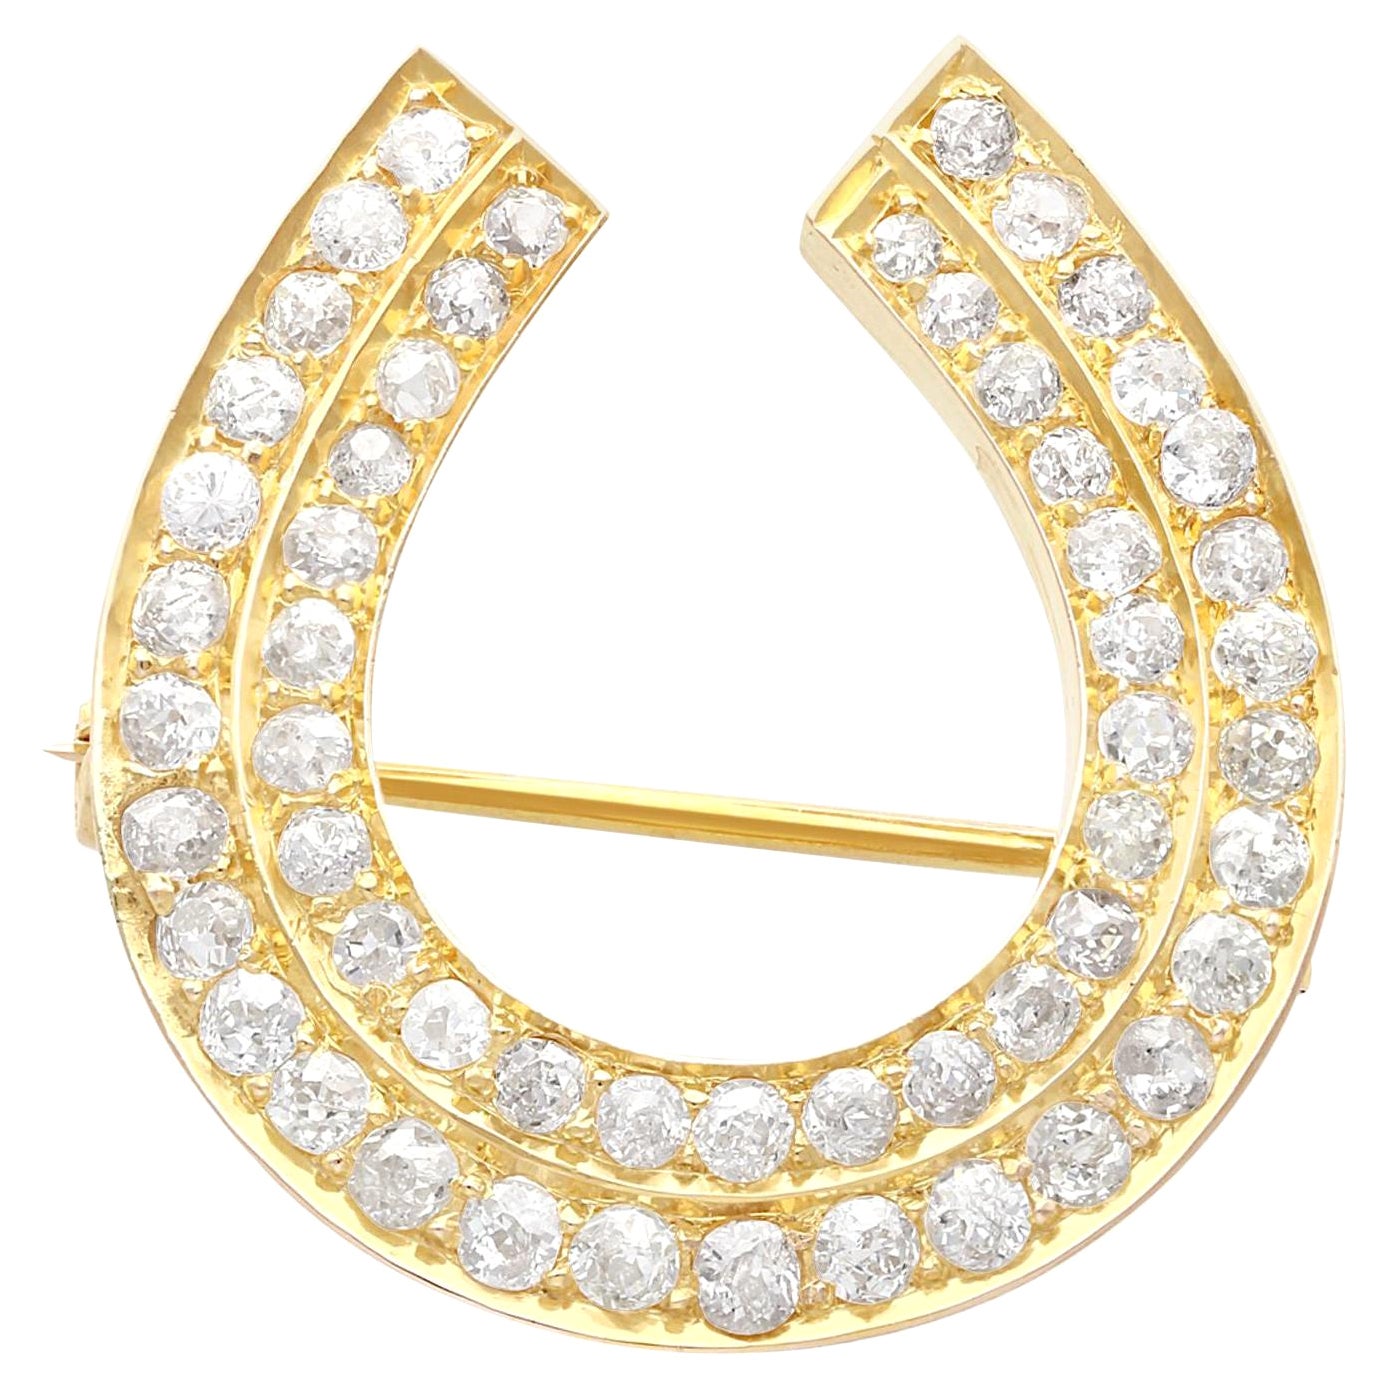 Antique 2.36 Carat Diamond and Yellow Gold Horseshoe Brooch For Sale